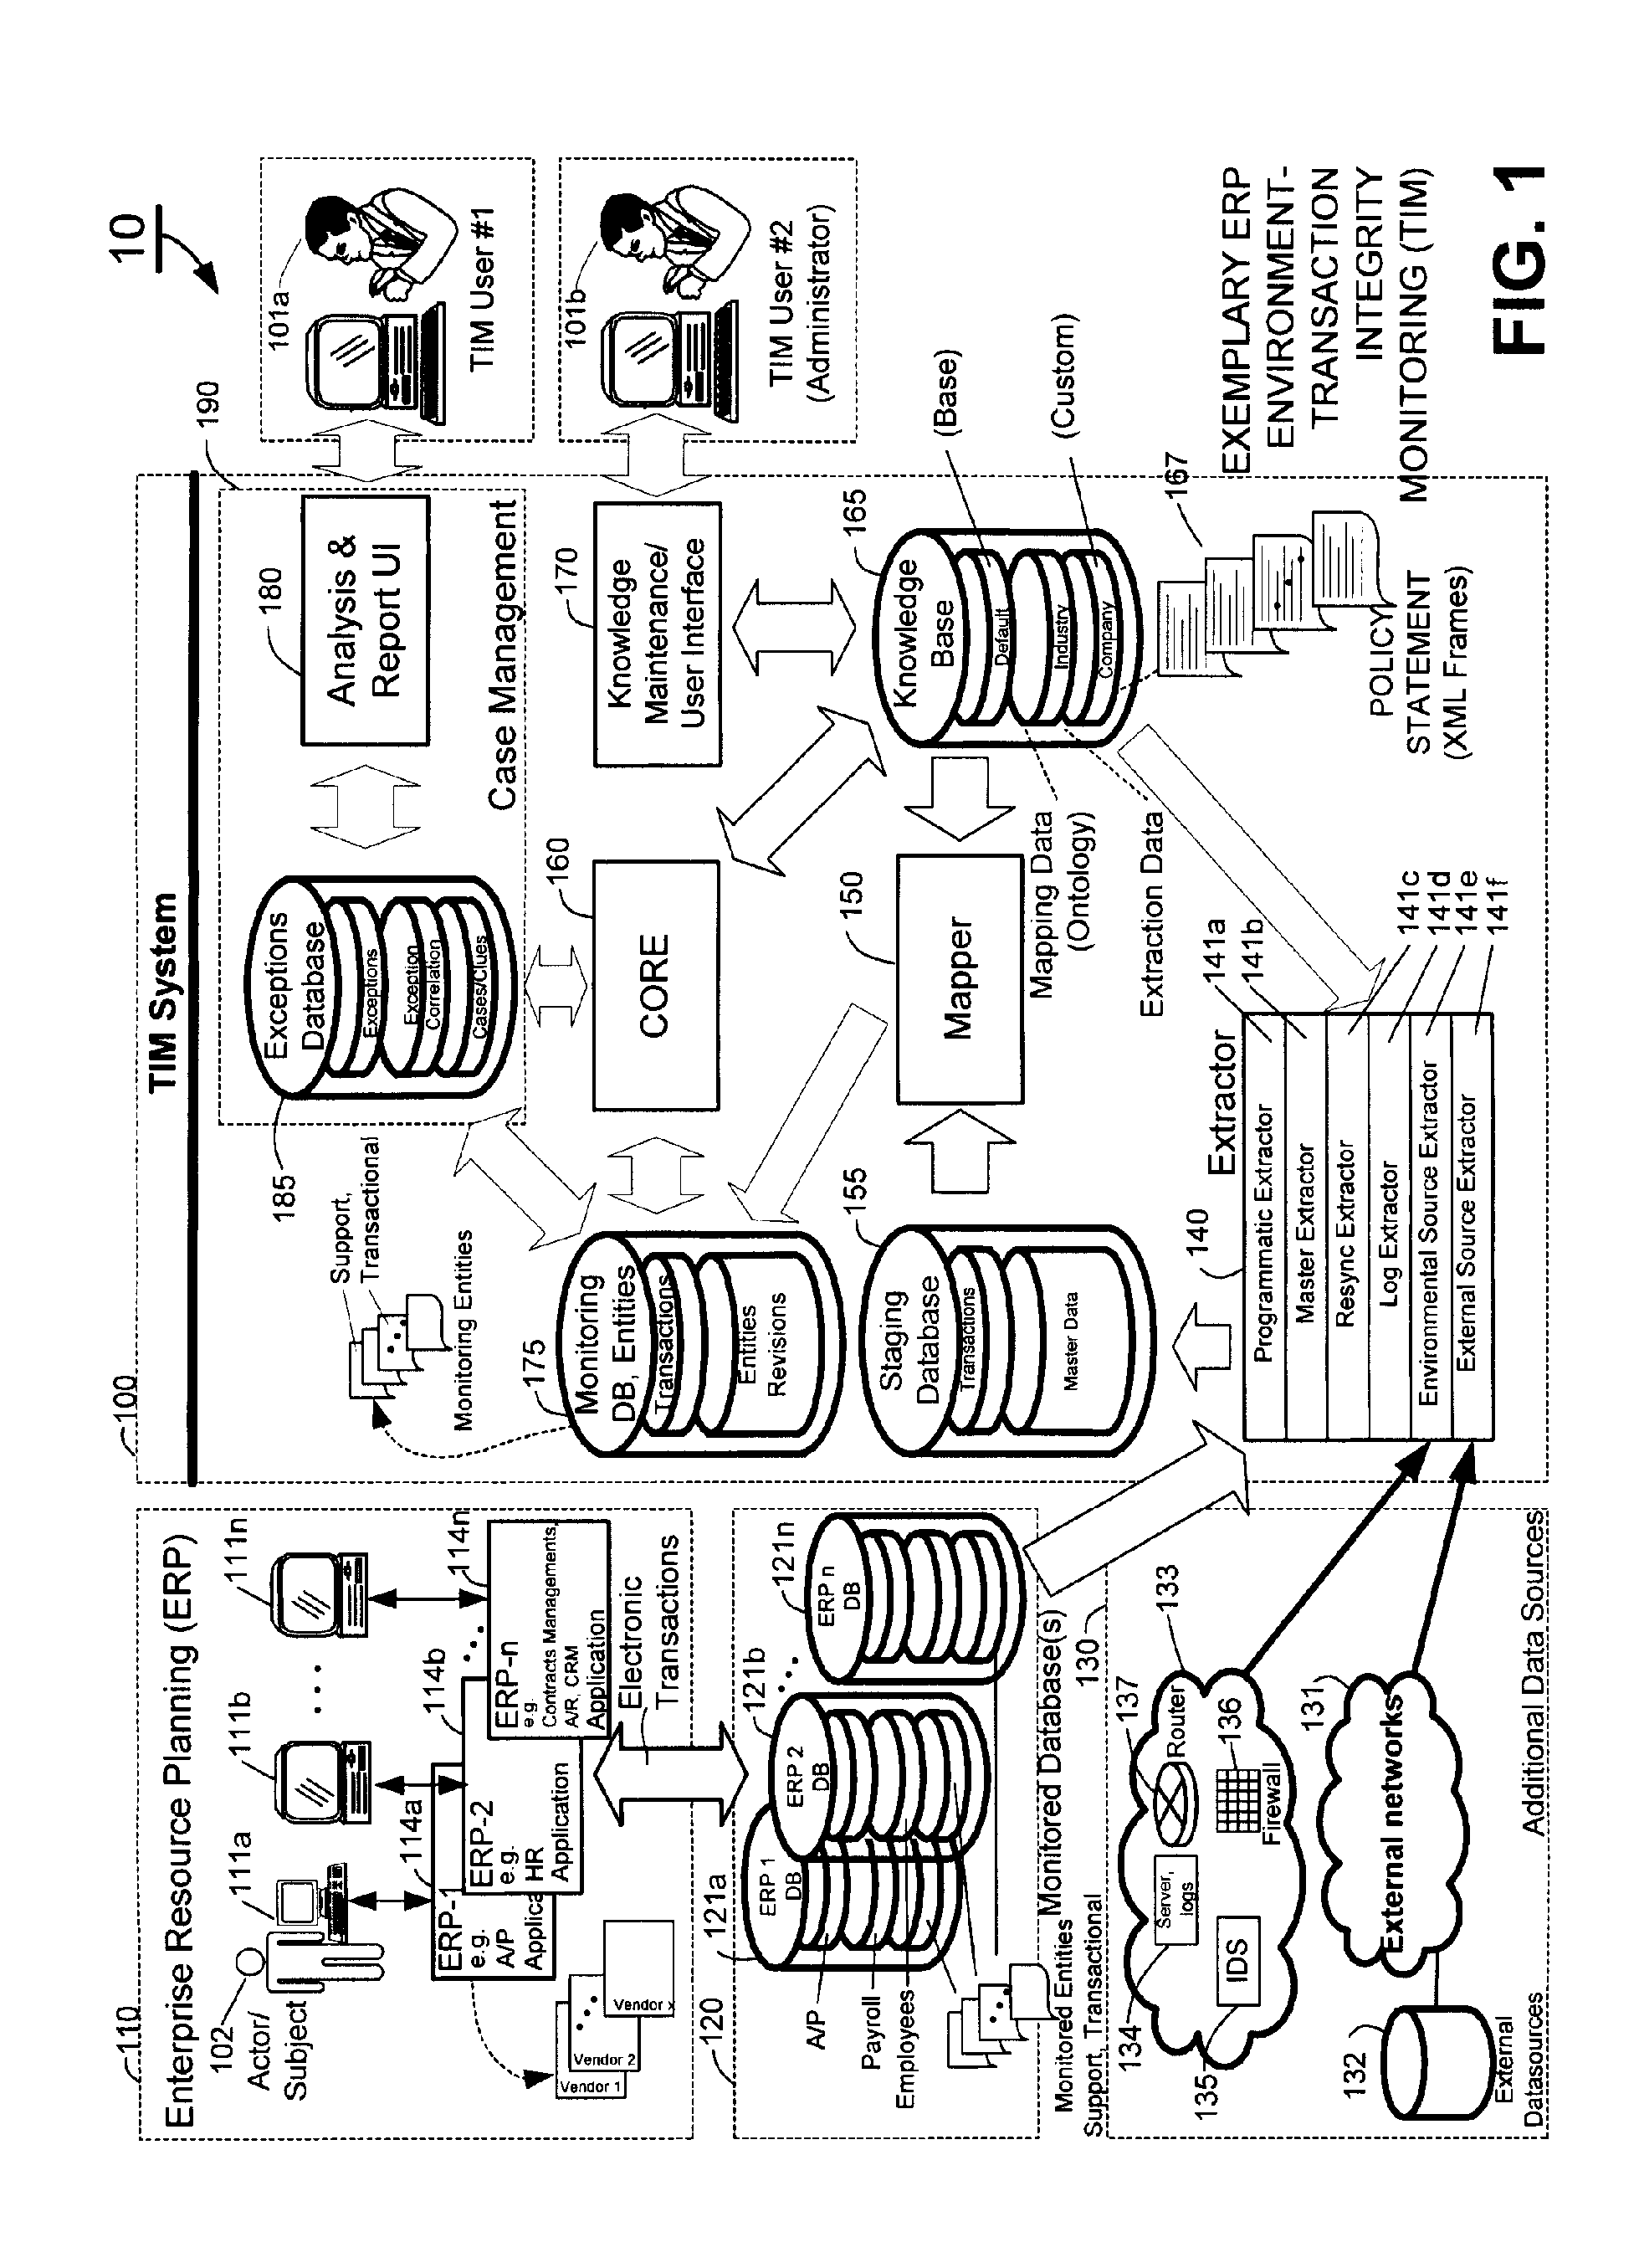 Methods and systems for monitoring transaction entity versions for policy compliance